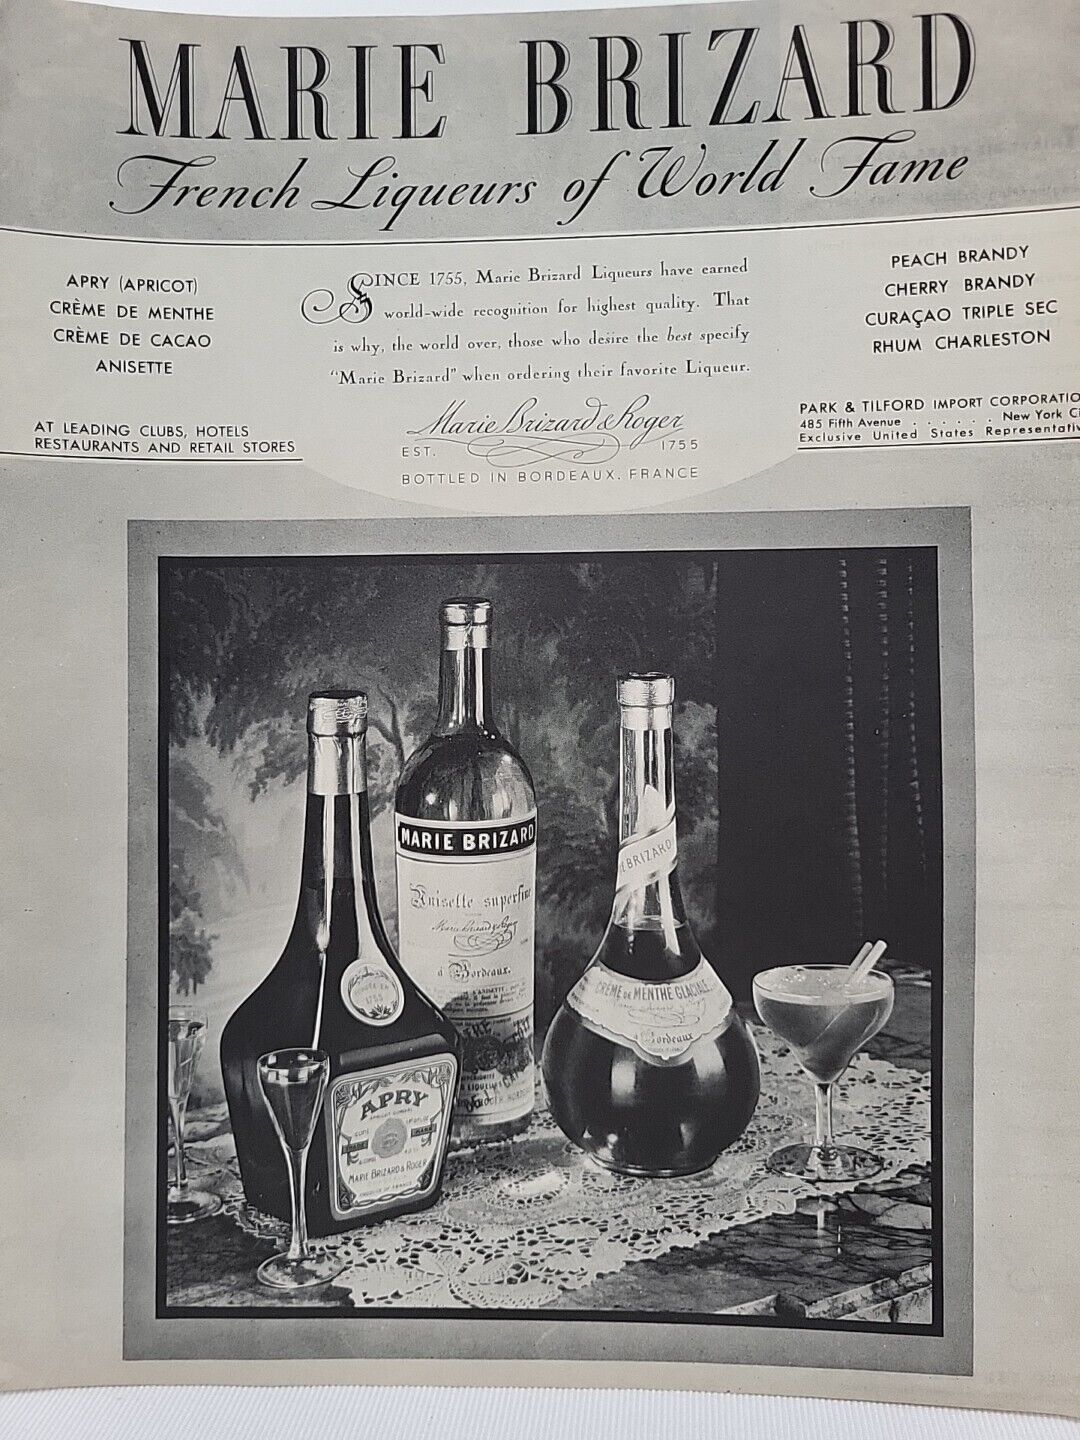 1934 Marie Brizard French Liqueurs Fortune Magazine Print Advertising APRY